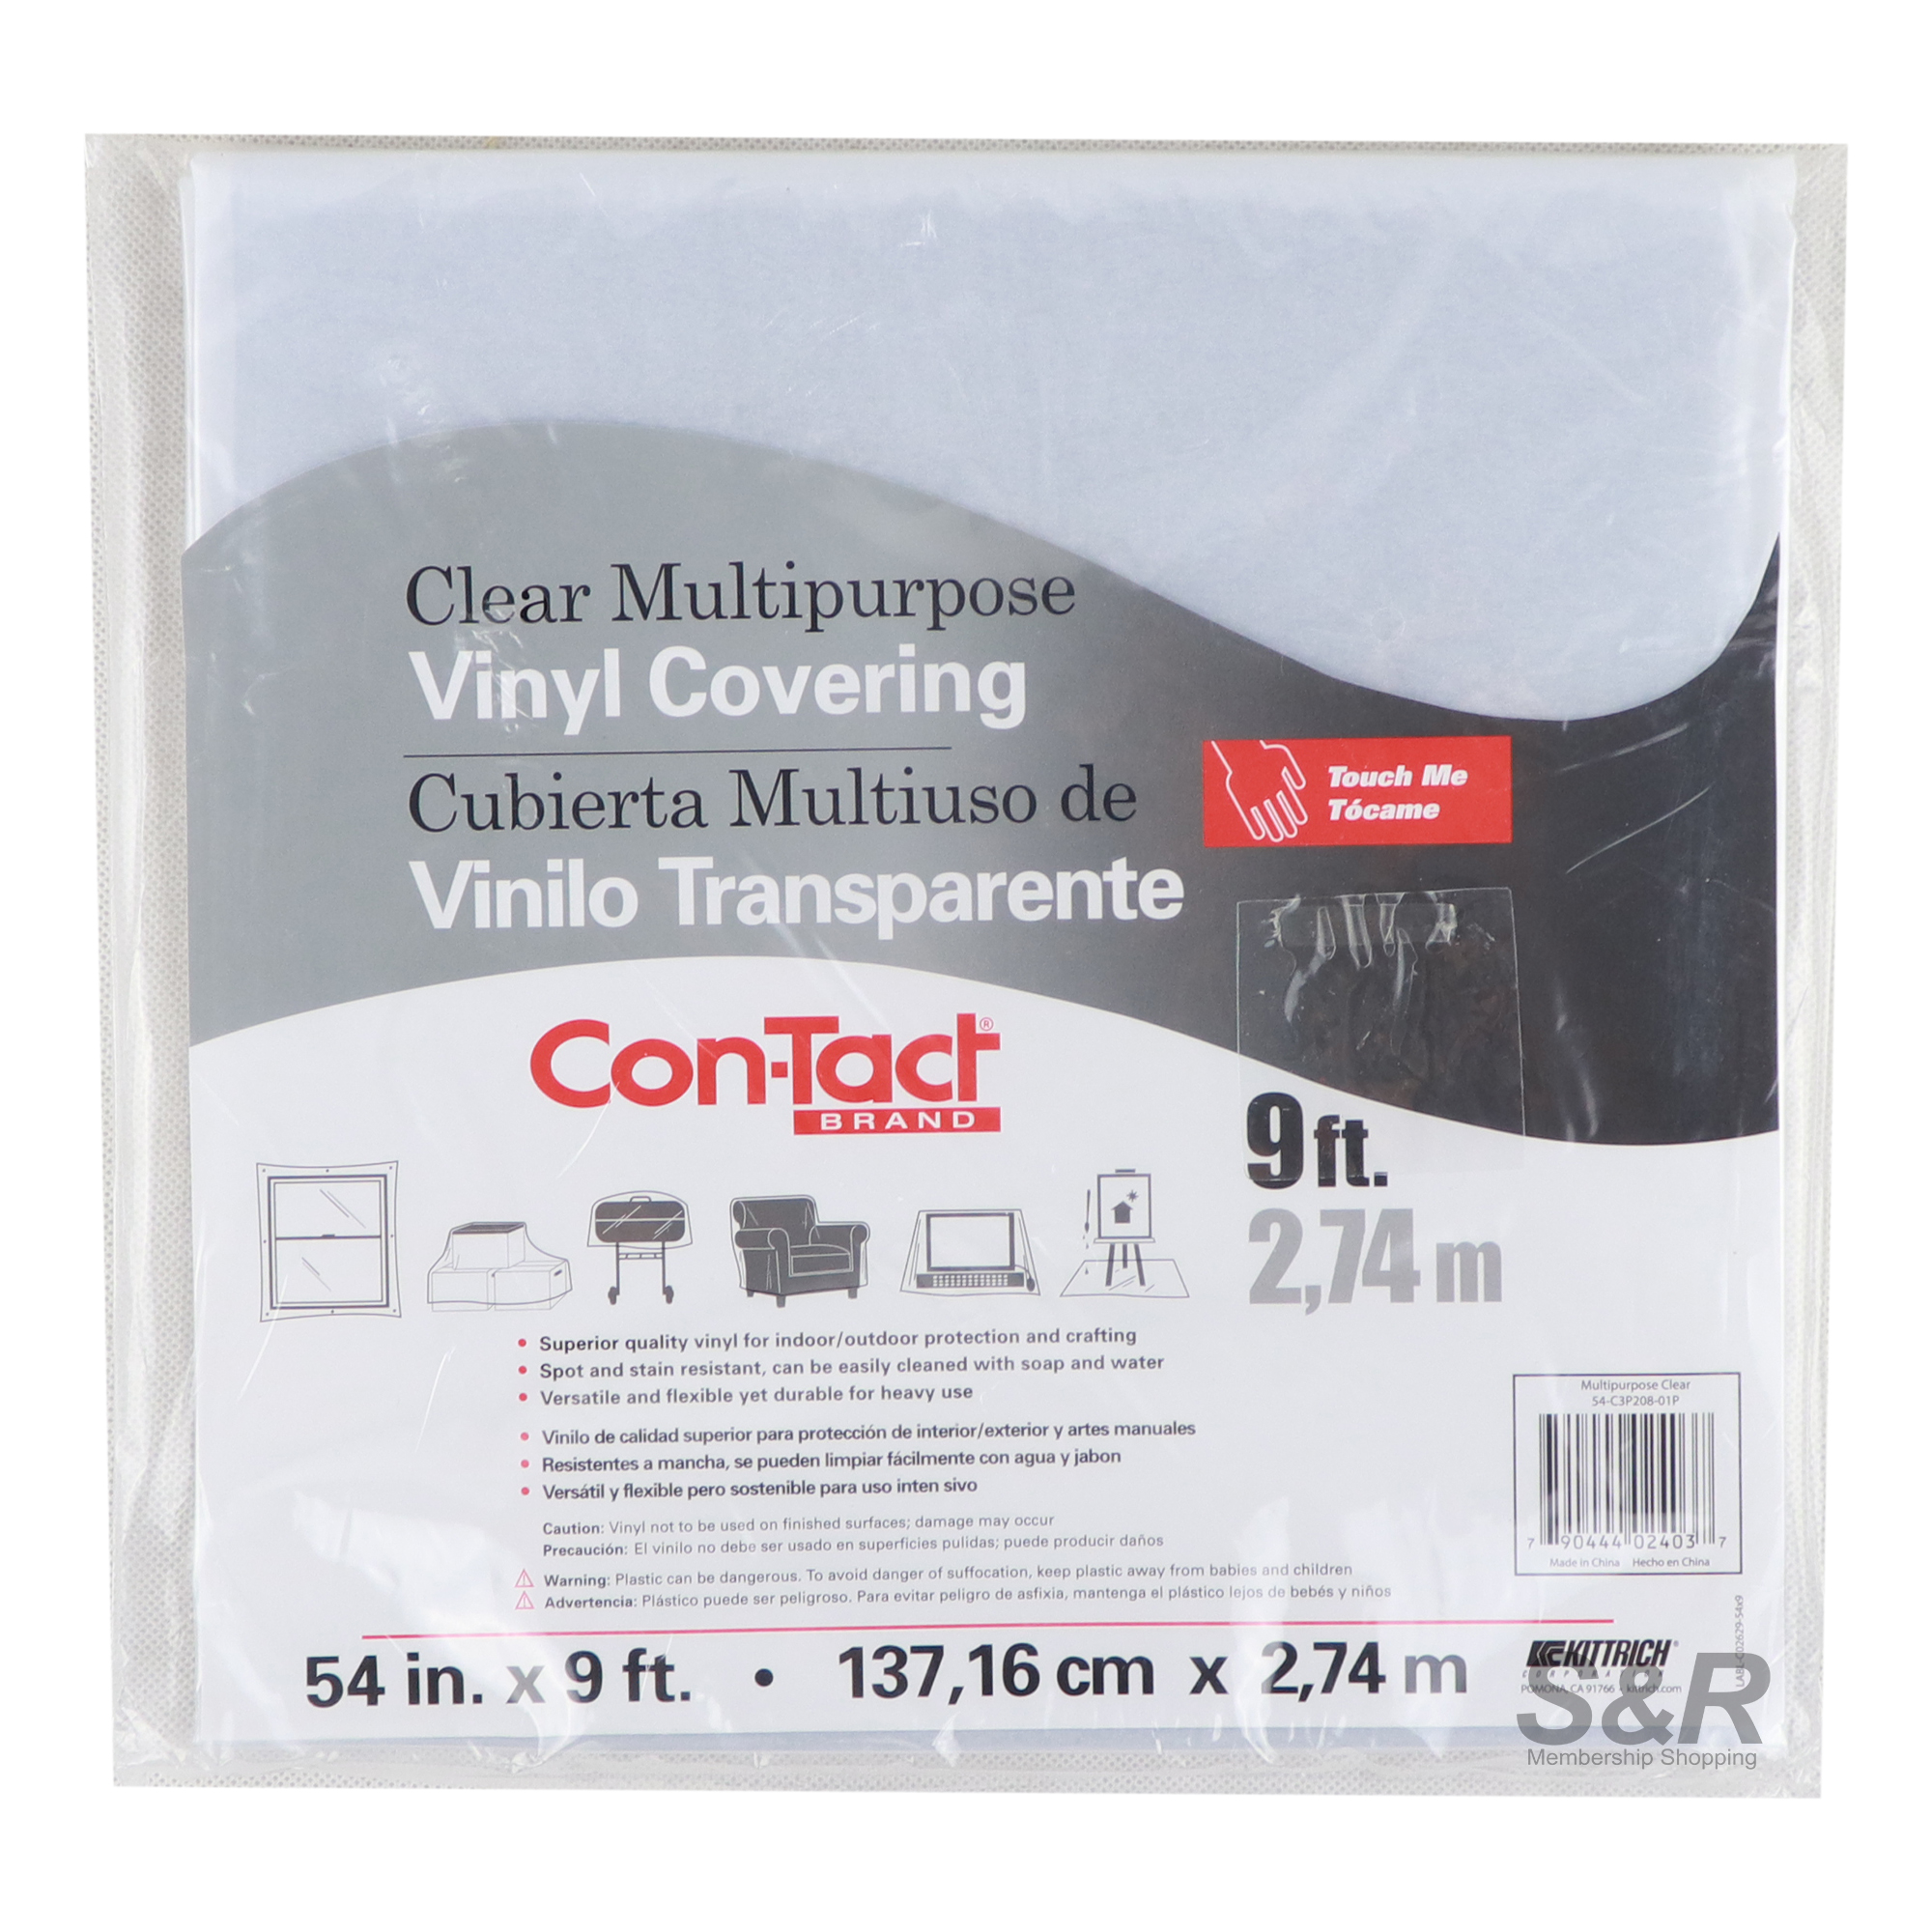 Con-Tact Clear Multipurpose Vinyl Covering 1pc